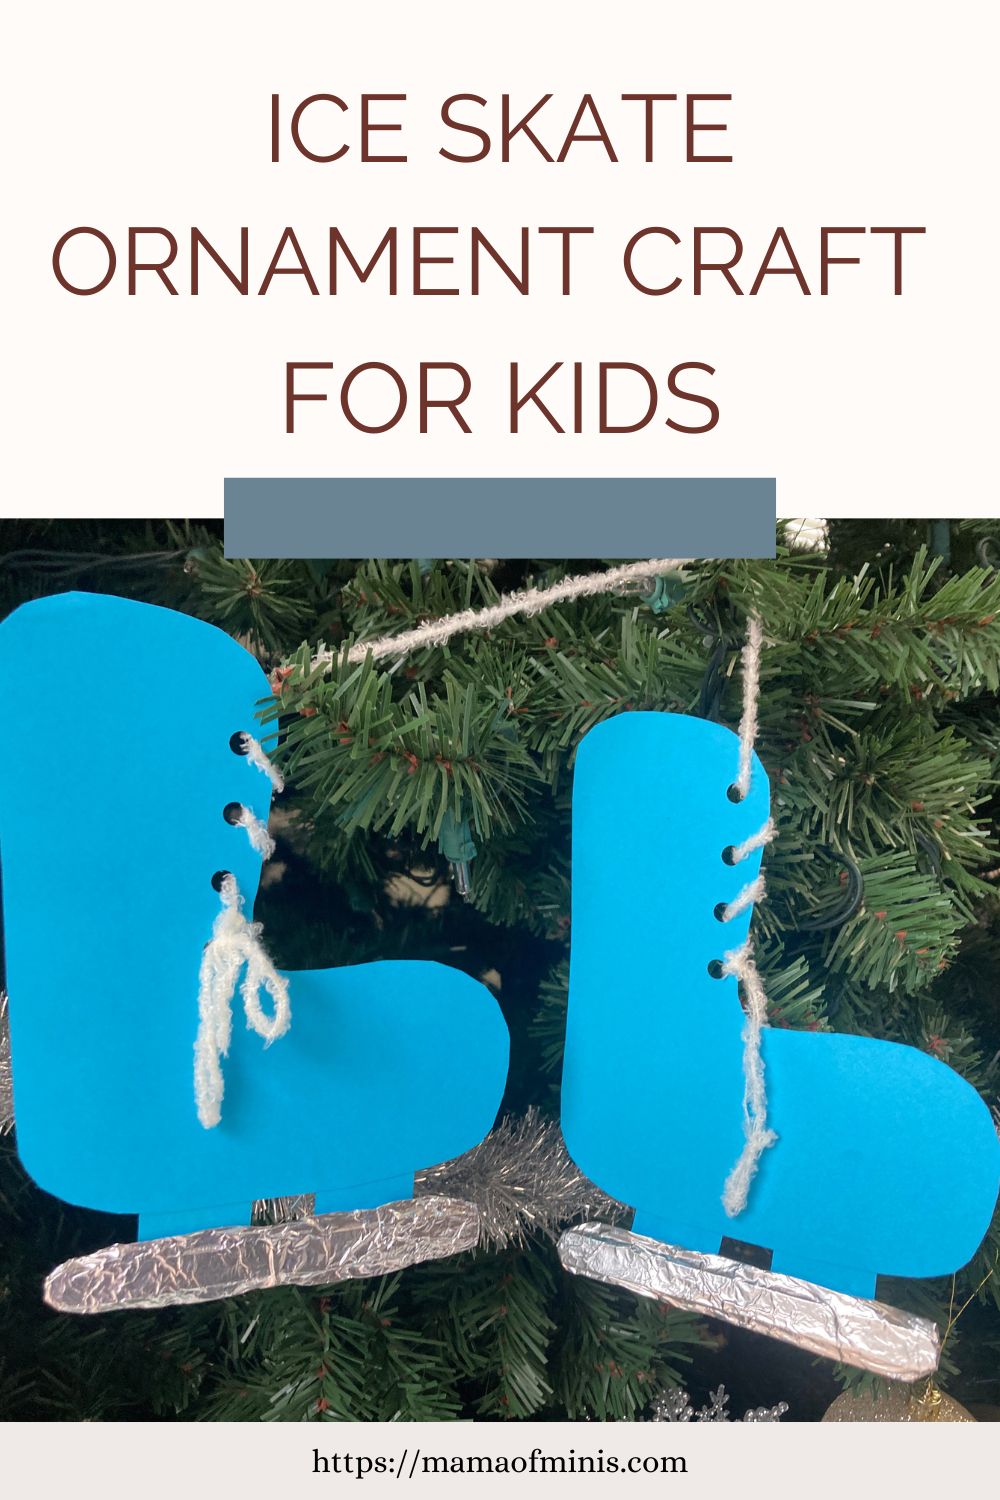 Ice Skate Ornament Craft for Kids